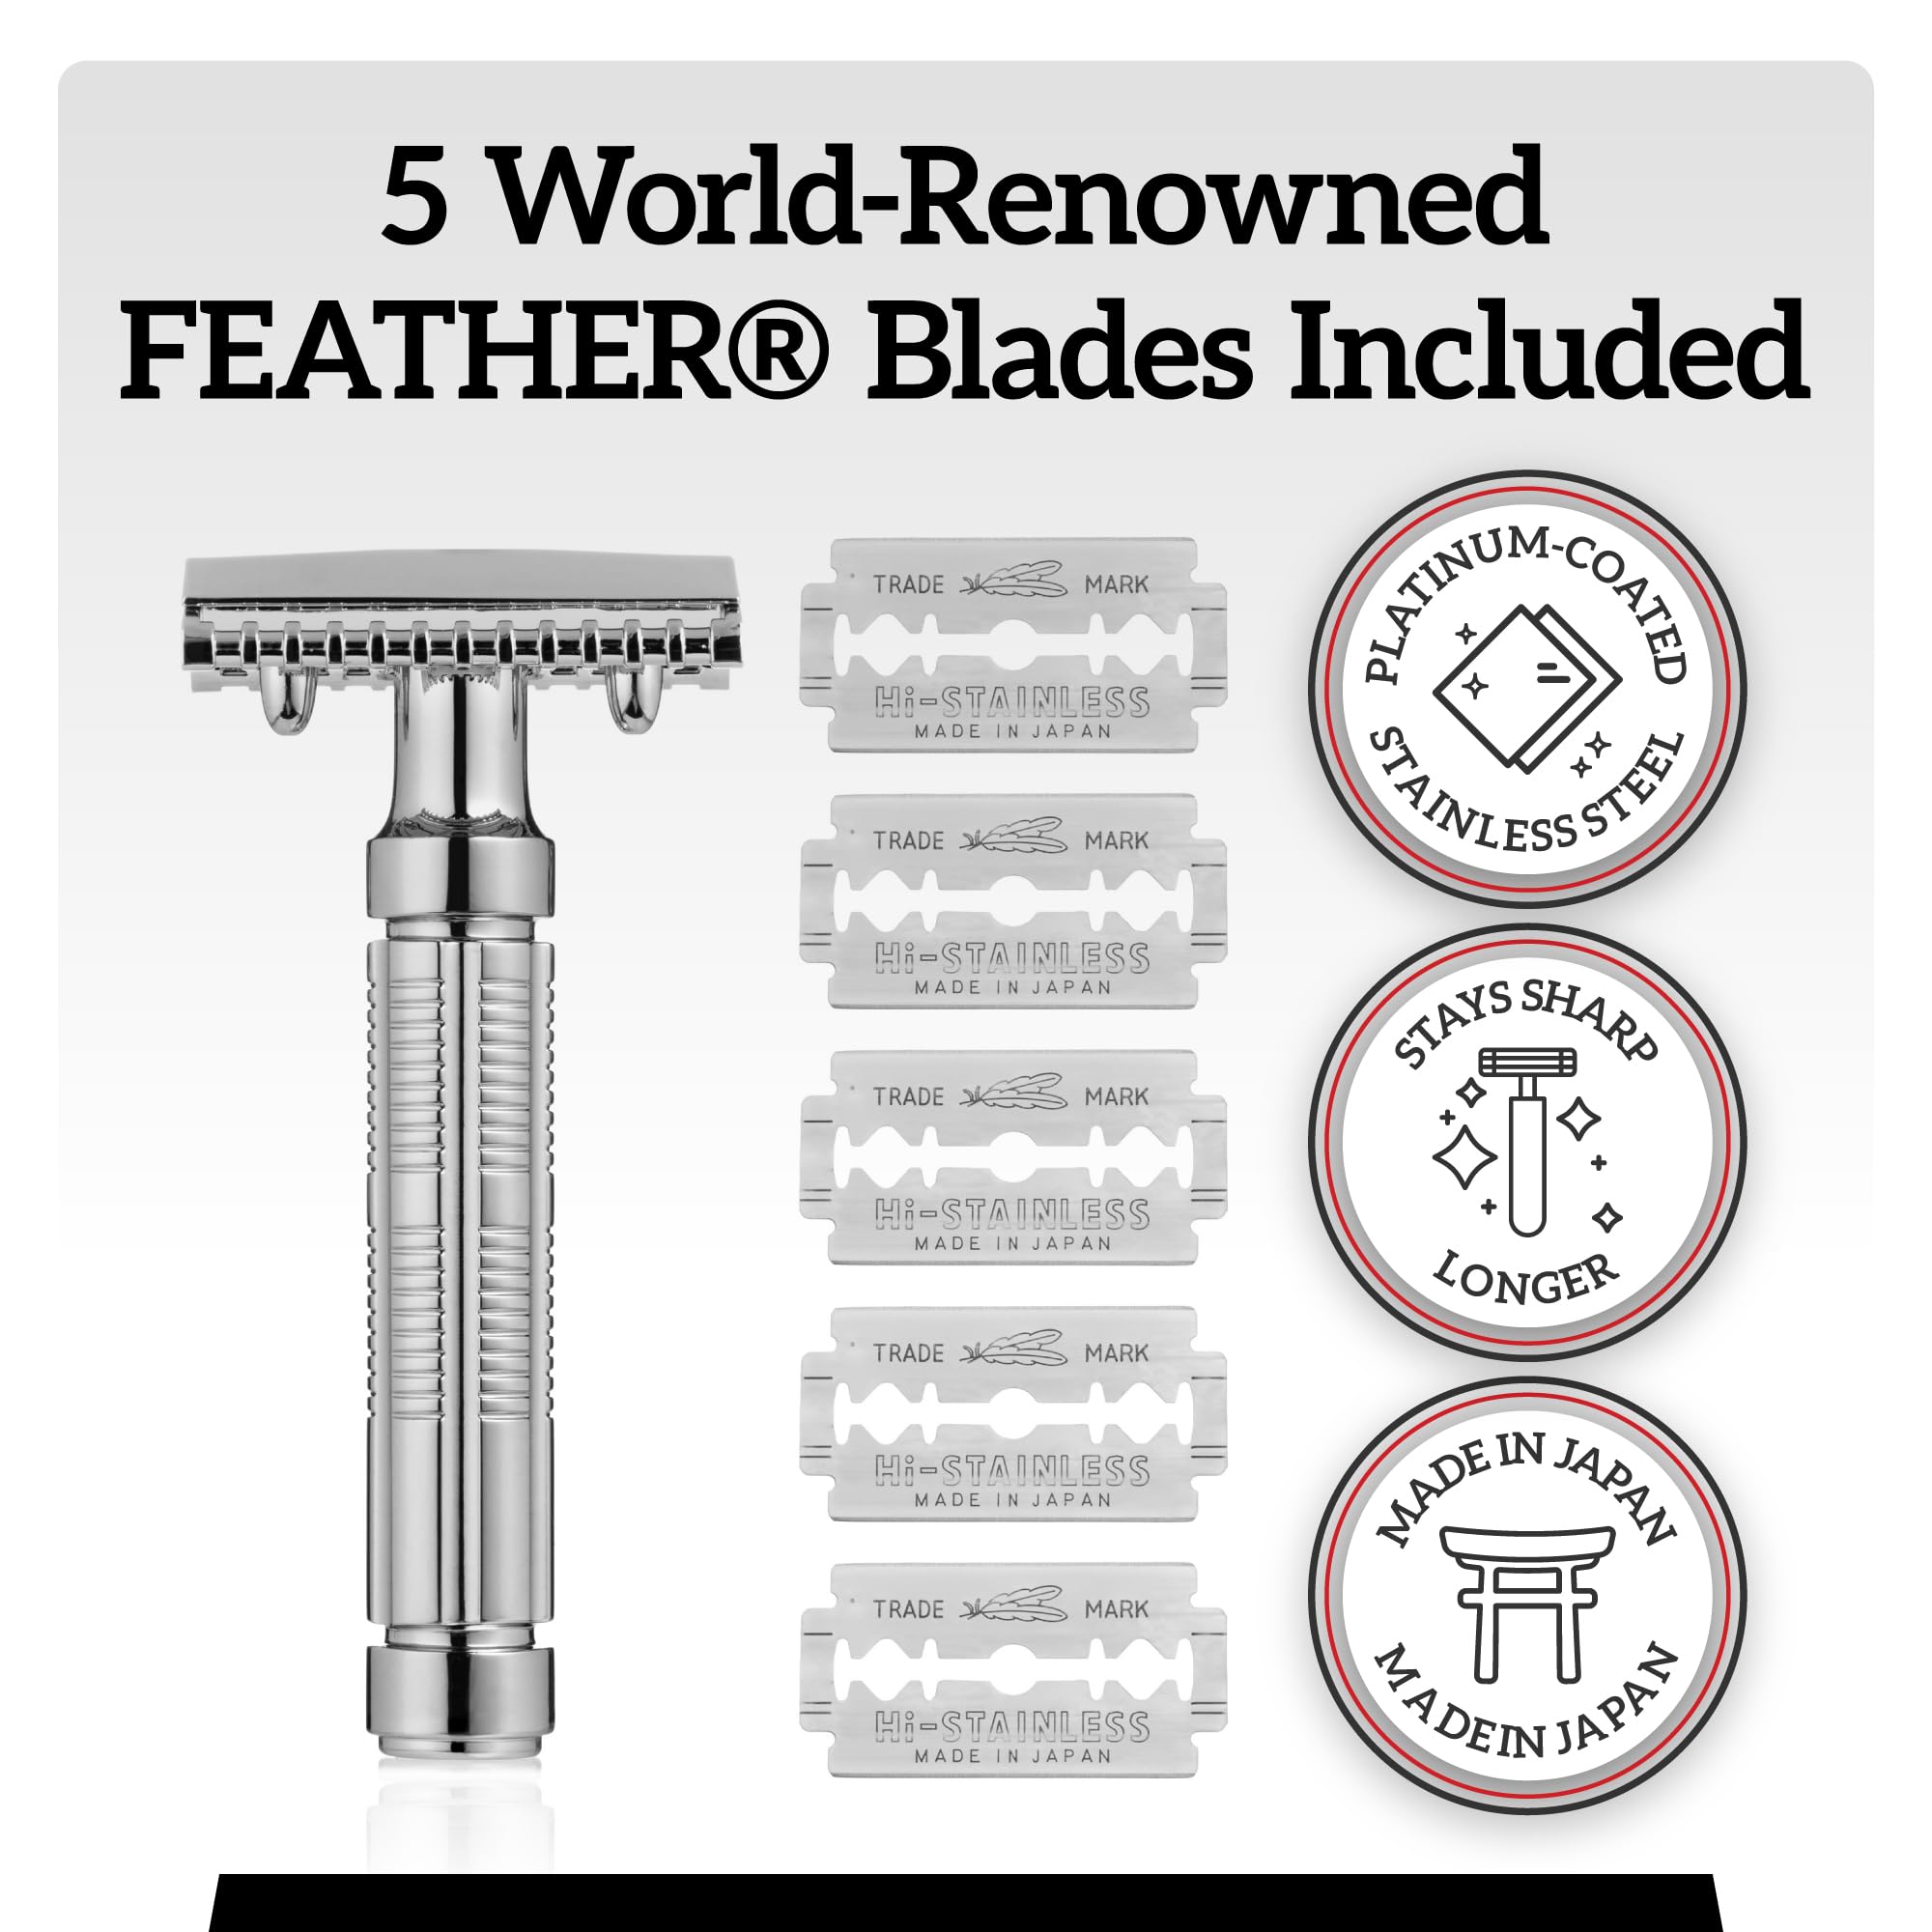 Mr. Fine Premium Double Edge Safety Razor for Wet Shaving, Single Blade Razor, Close Shave, Open-Comb Guard, 100% Metal w/Stainless Steel Core, 5 Feather Blades